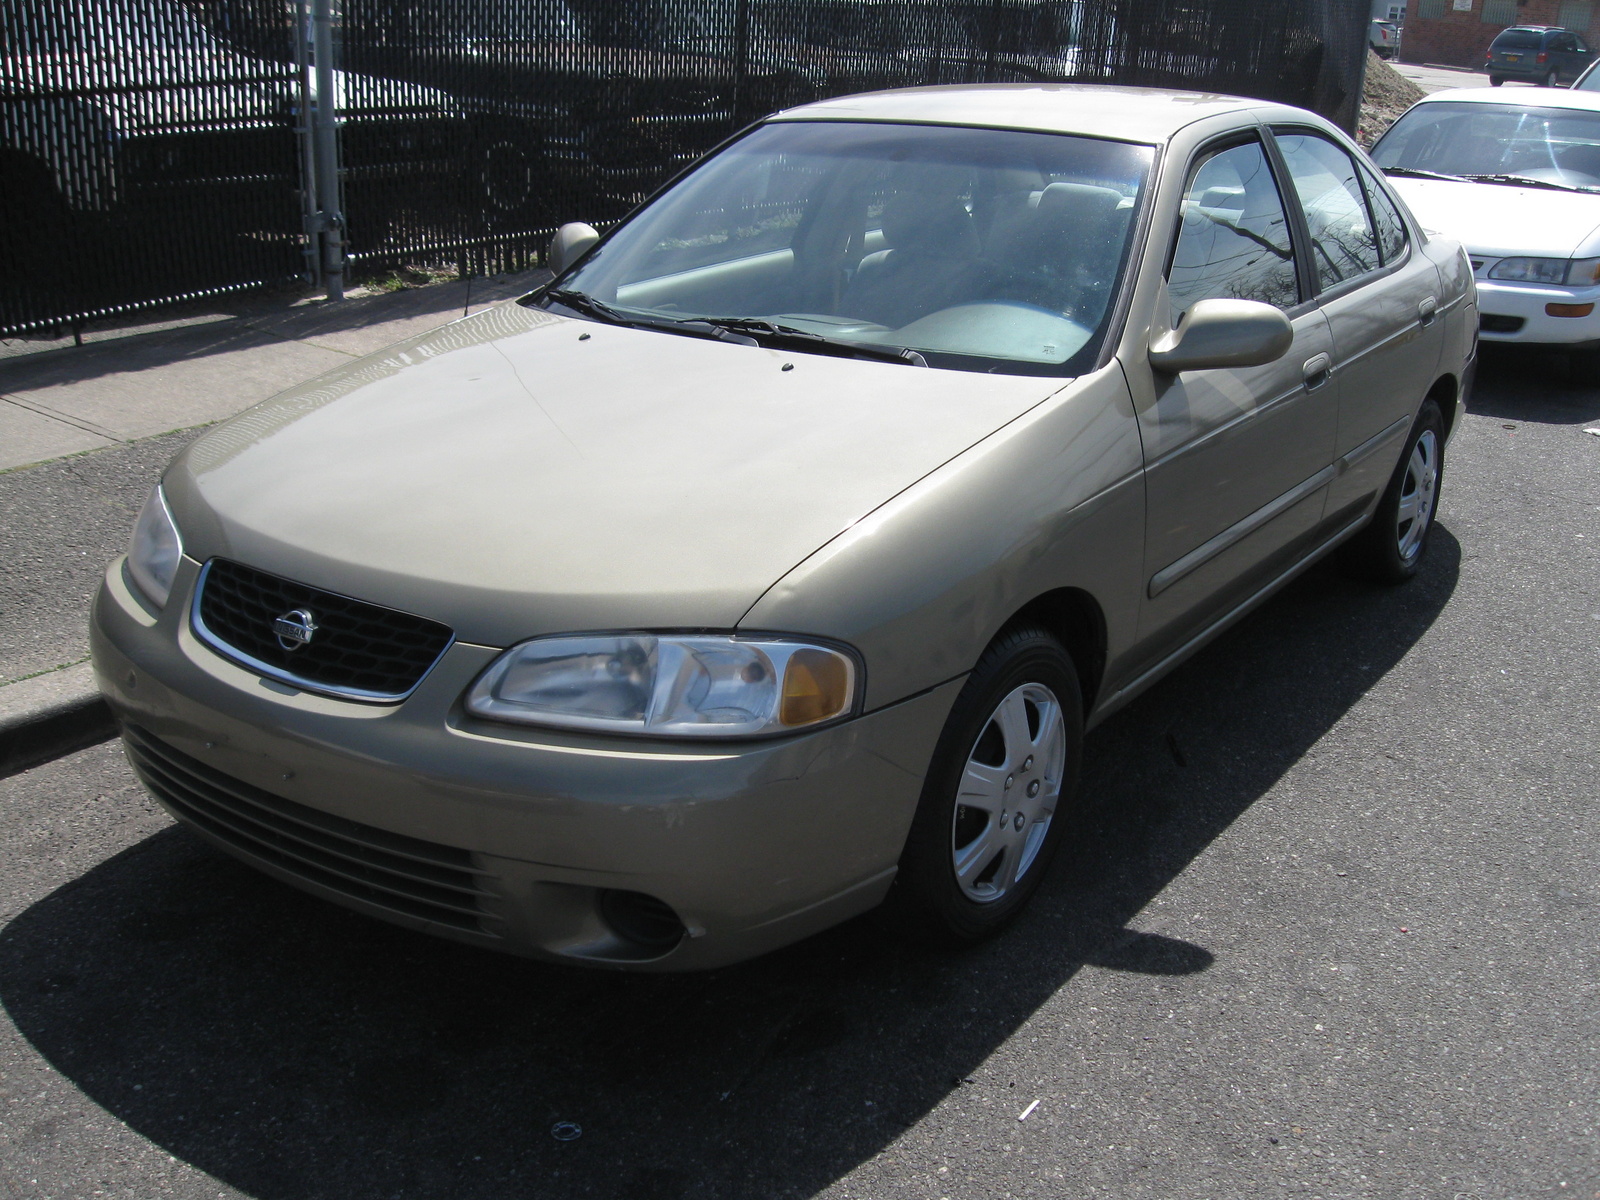 2001 Nissan sentra gxe specifications #6